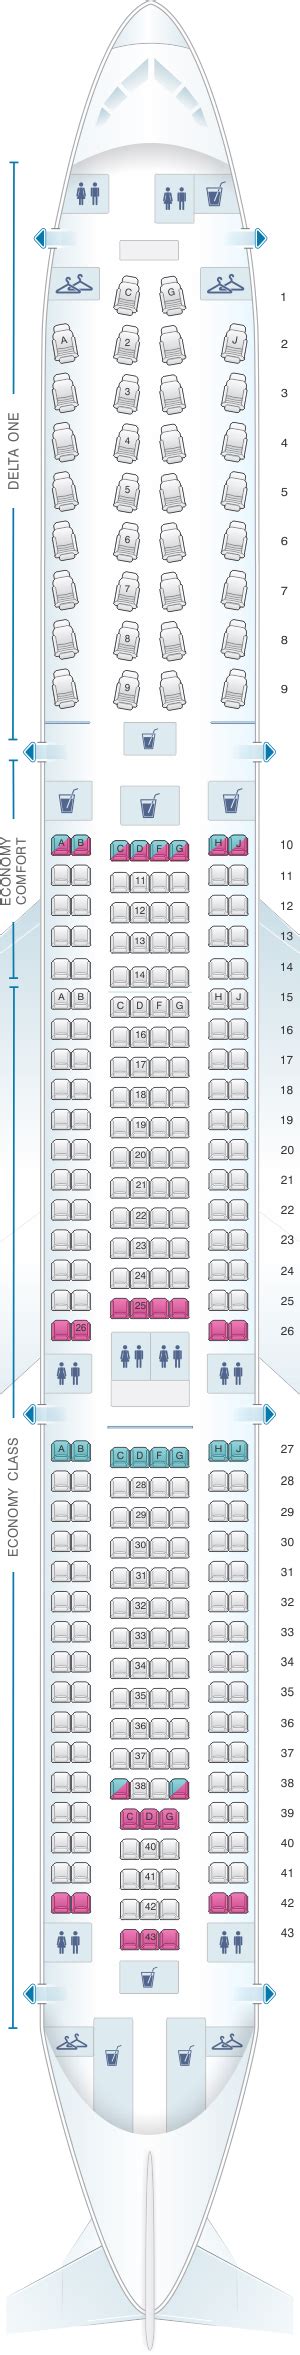 Seat Map Airbus A330 200 Air France Best Seats In Plane Zohal